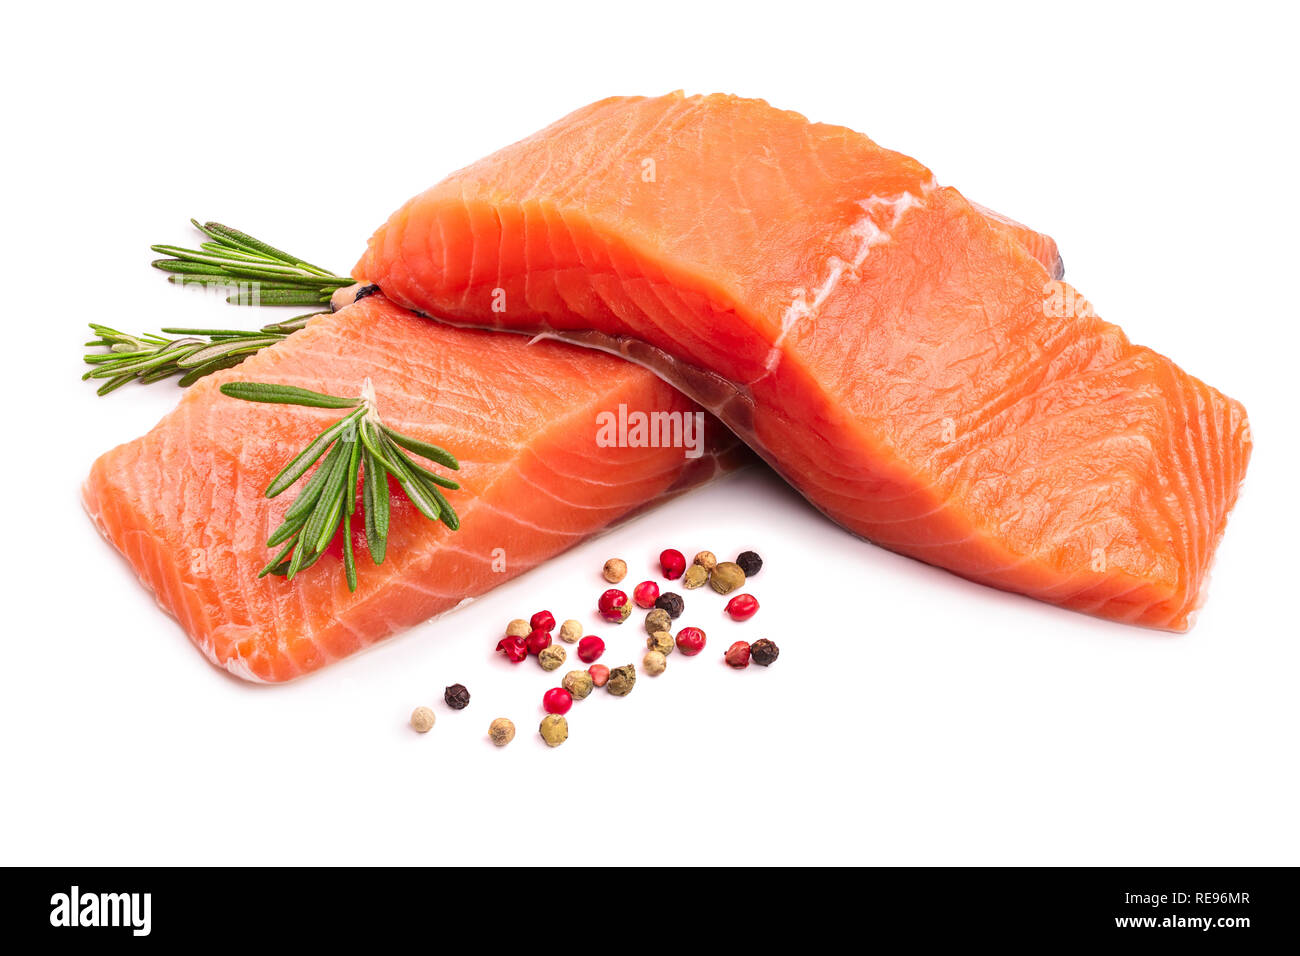 fillet of red fish salmon with rosemary isolated on white background Stock Photo